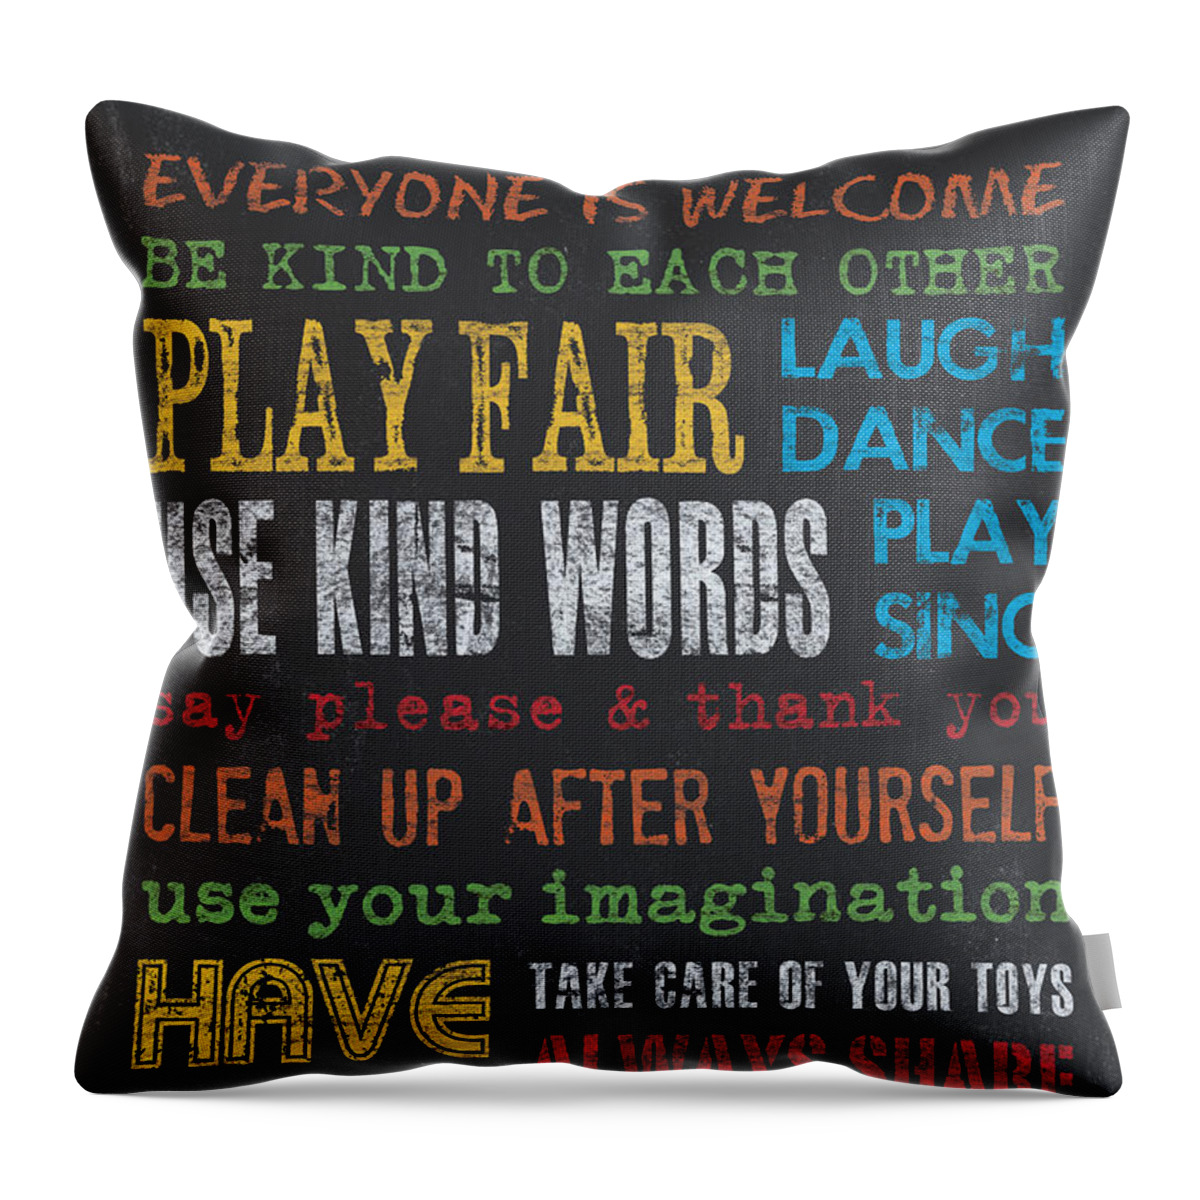 Playroom Throw Pillow featuring the painting Playroom Rules by Debbie DeWitt